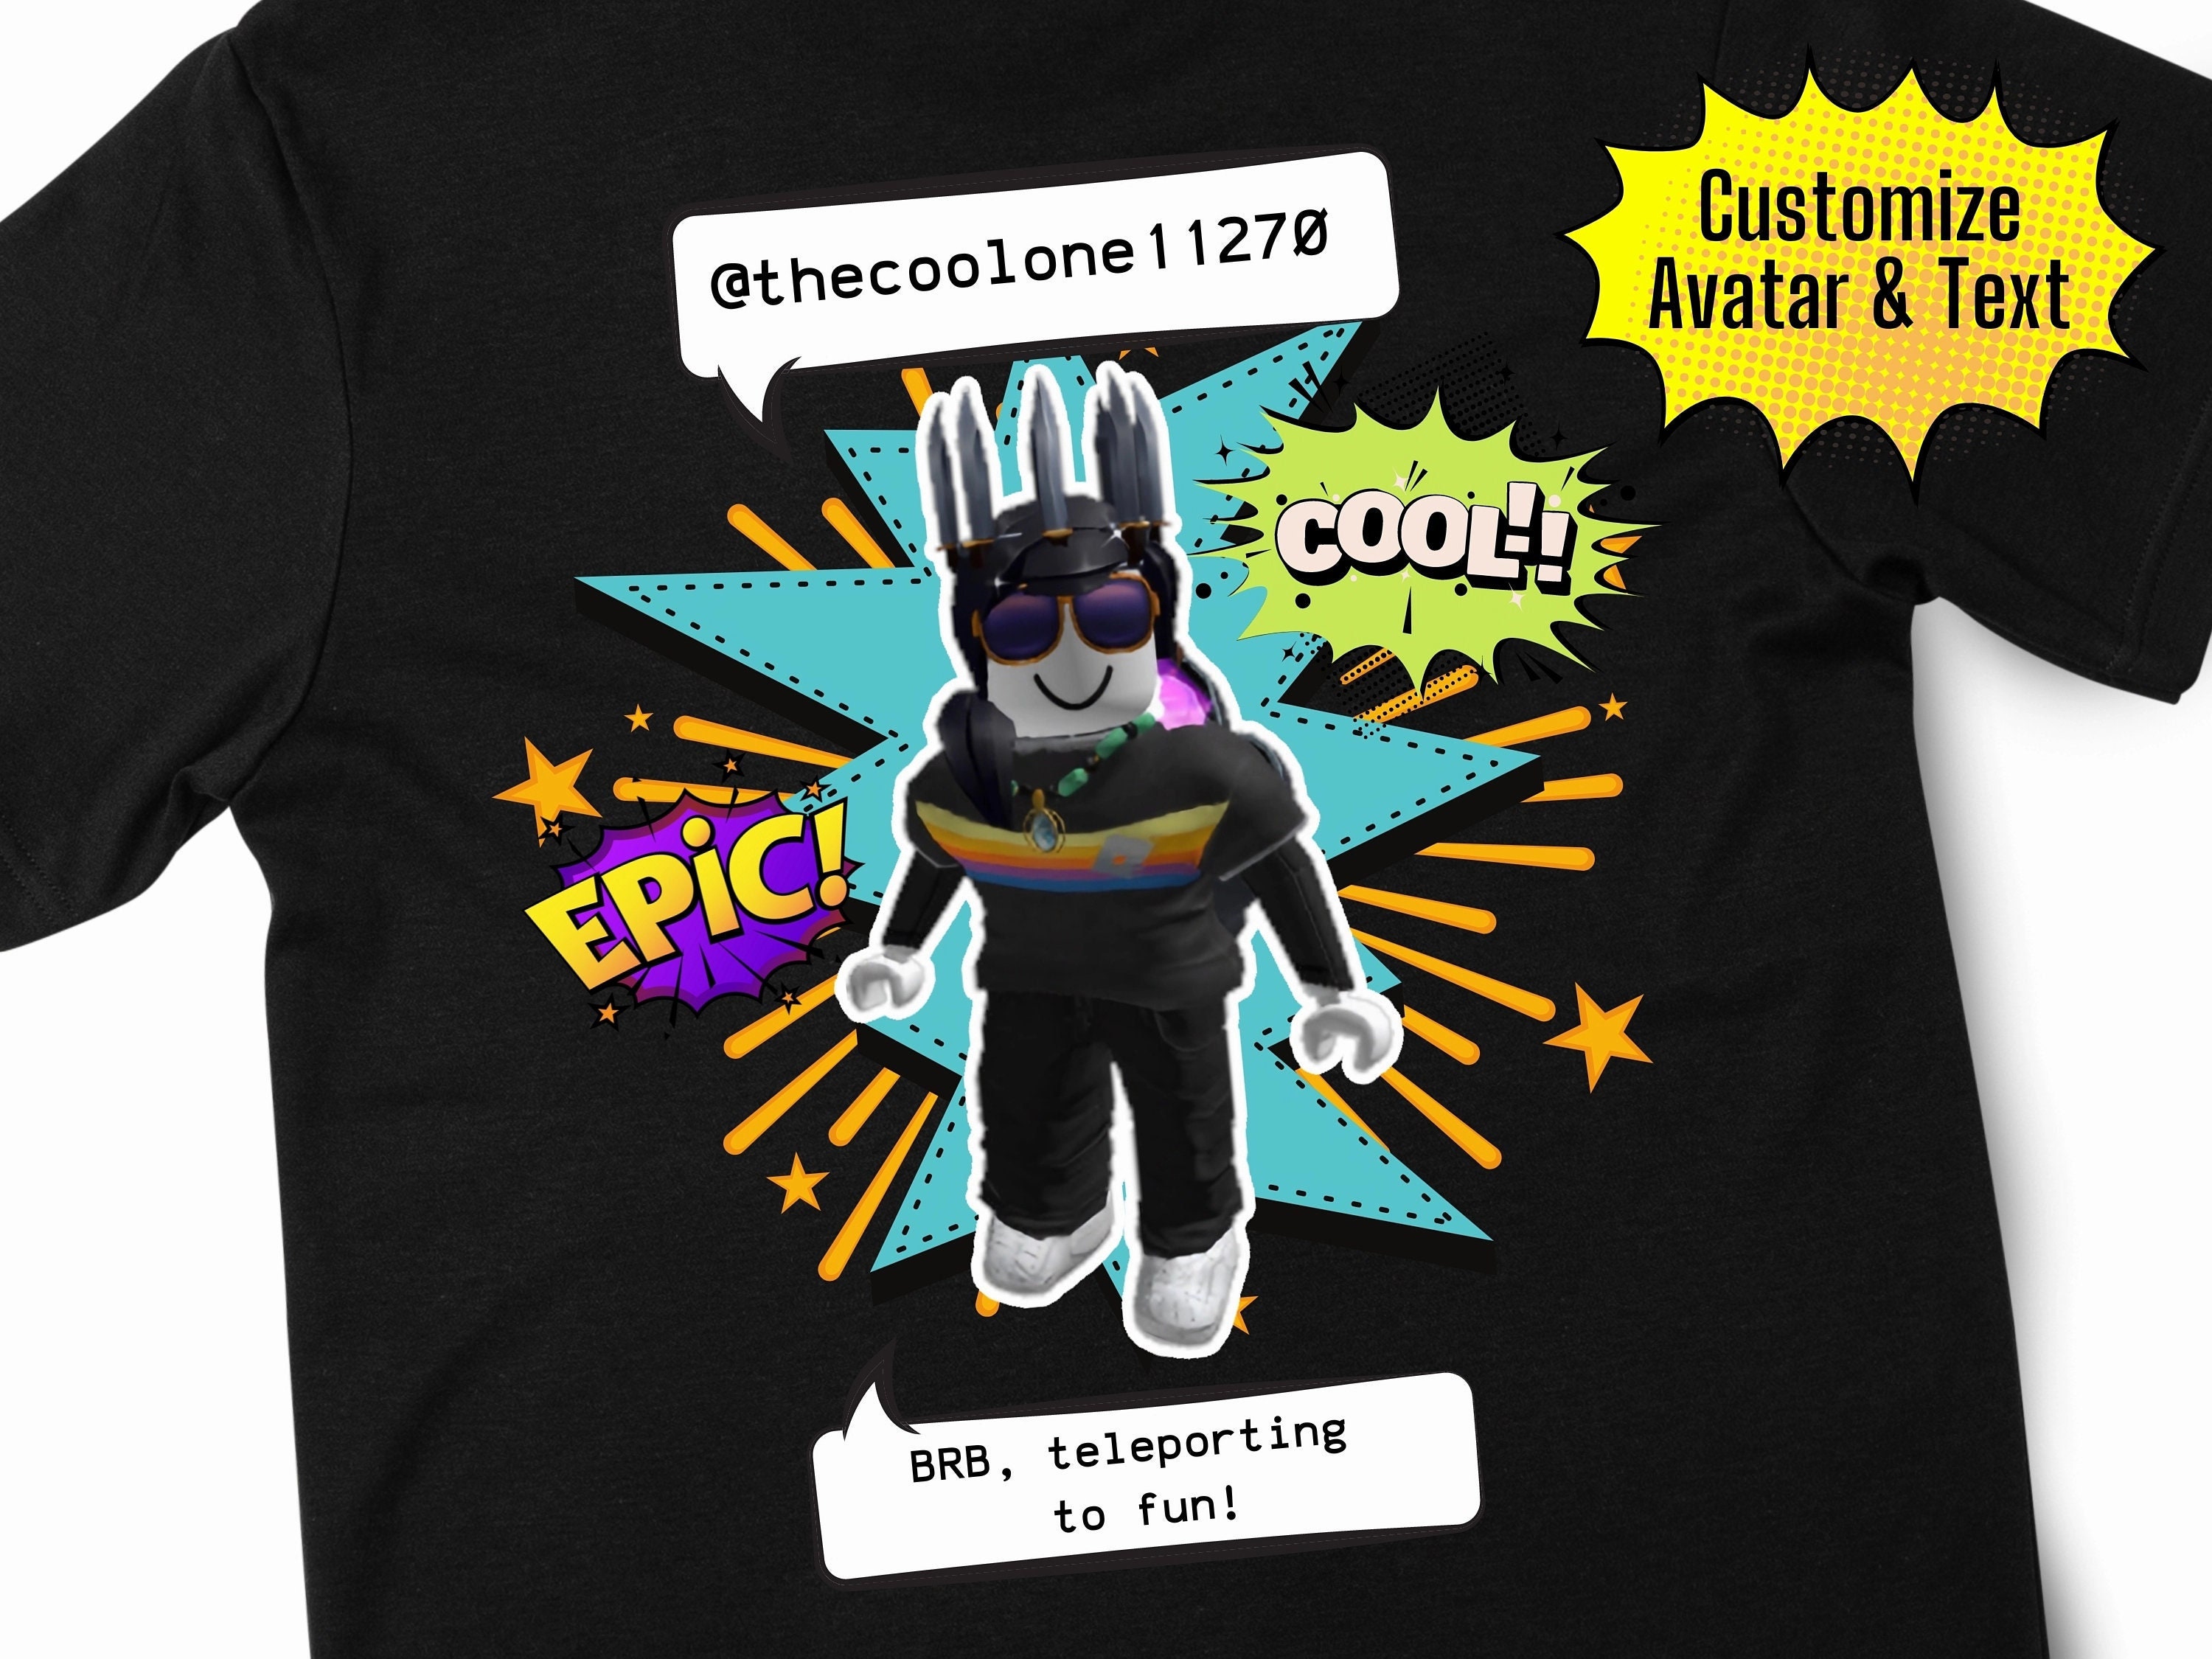 Thanks for 50 members in da group!! #fyp#roblox#nike#shirt#tee#black#x